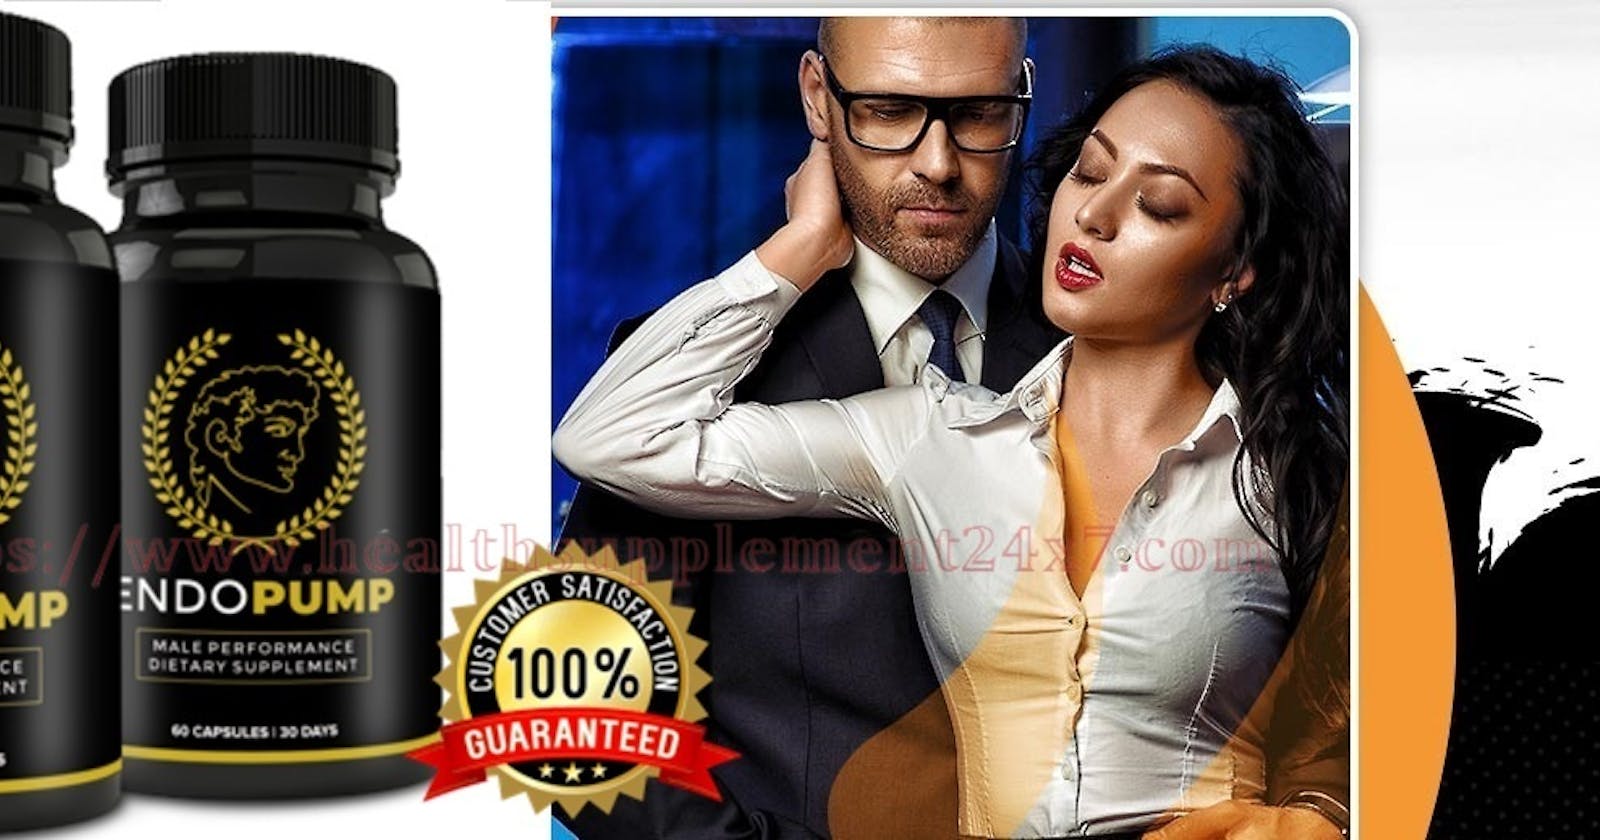 EndoPump Male Enhancement Increase And Boost Sex Drive & Arousal With a Bigger Appetite[2023 OFFER SALE](REAL OR HOAX)